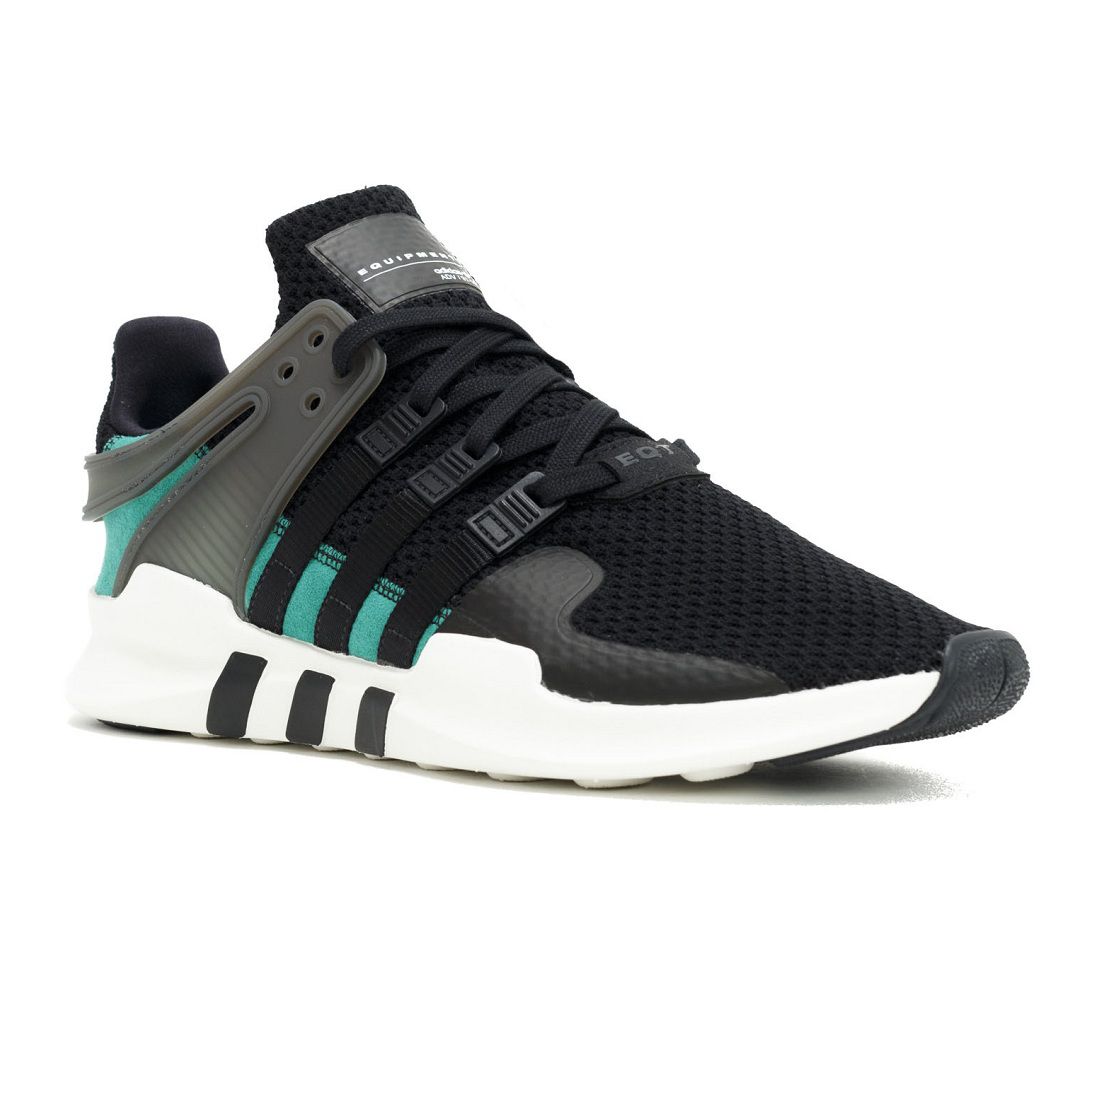 adidas equipment shoes price in india